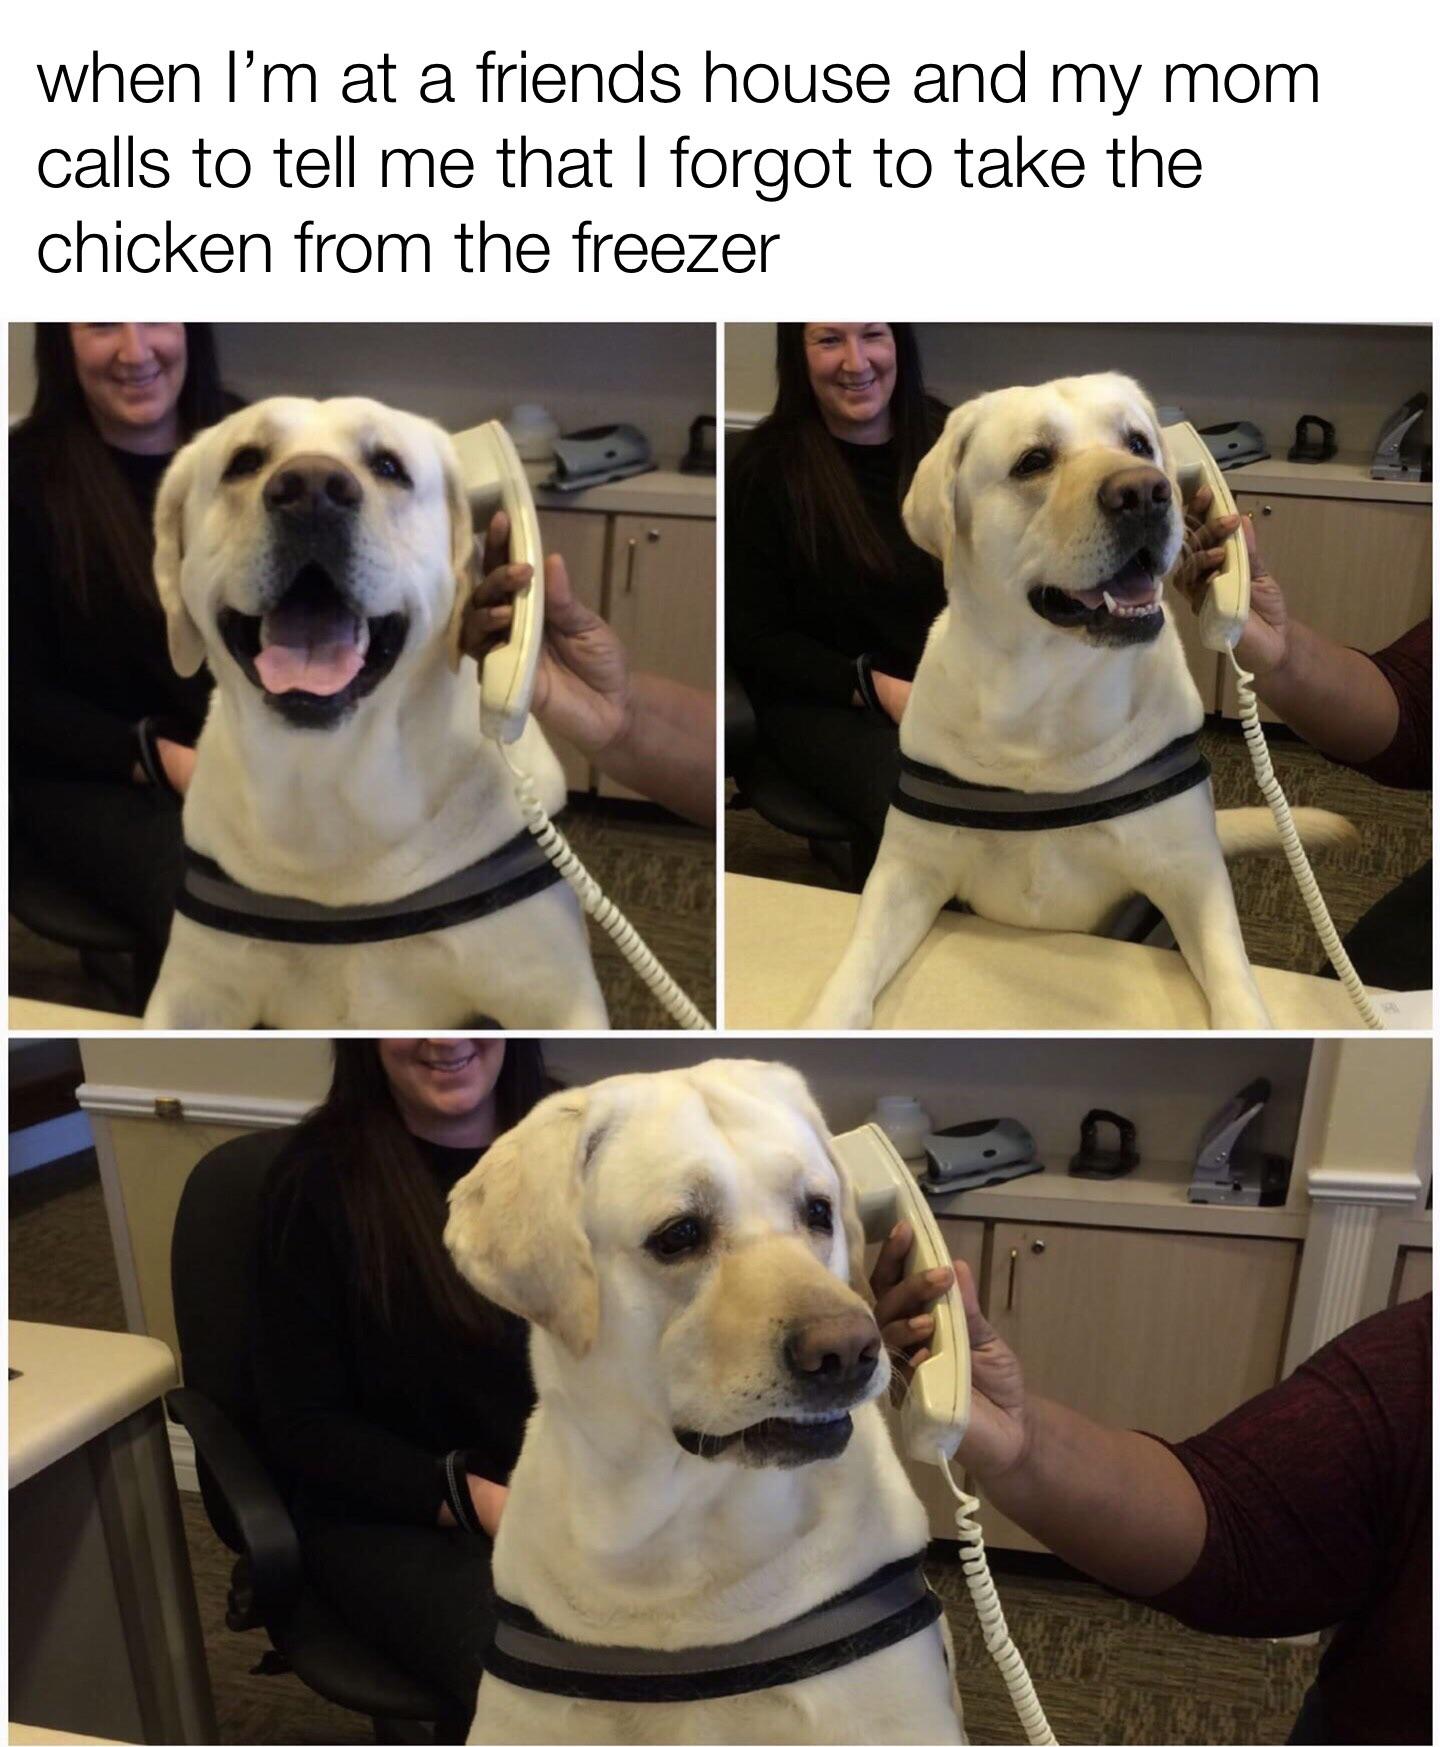 funny memes - dog on phone meme - when I'm at a friends house and my mom calls to tell me that I forgot to take the chicken from the freezer Amma